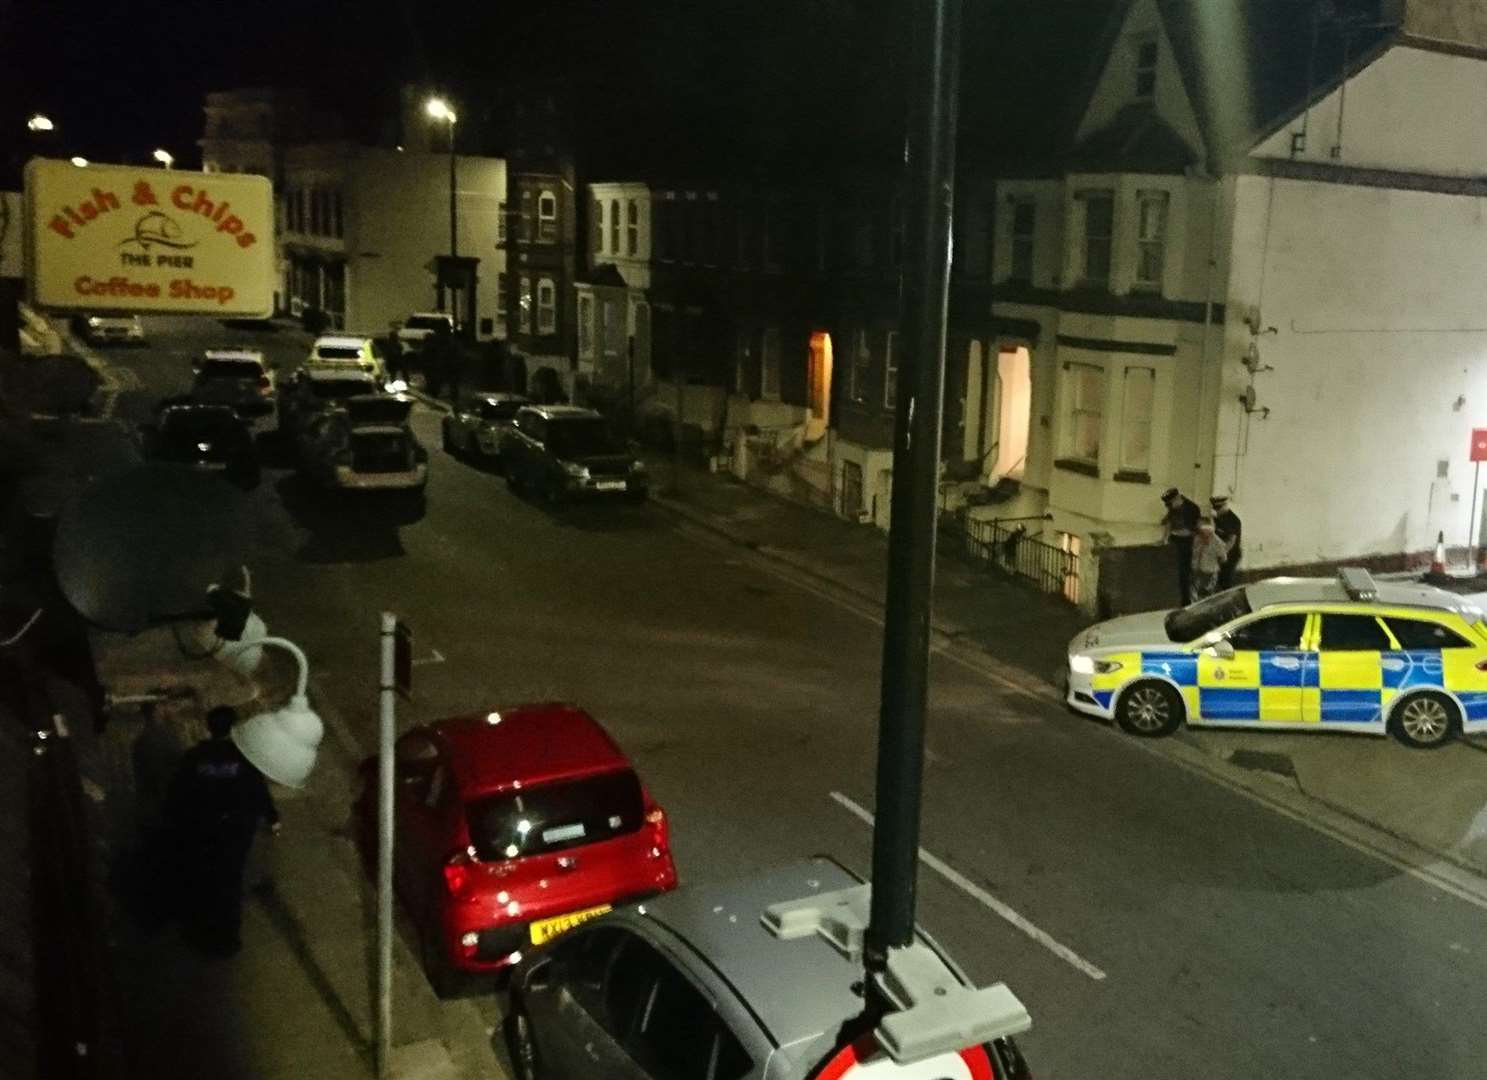 Police cordoned off a road in Herne Bay